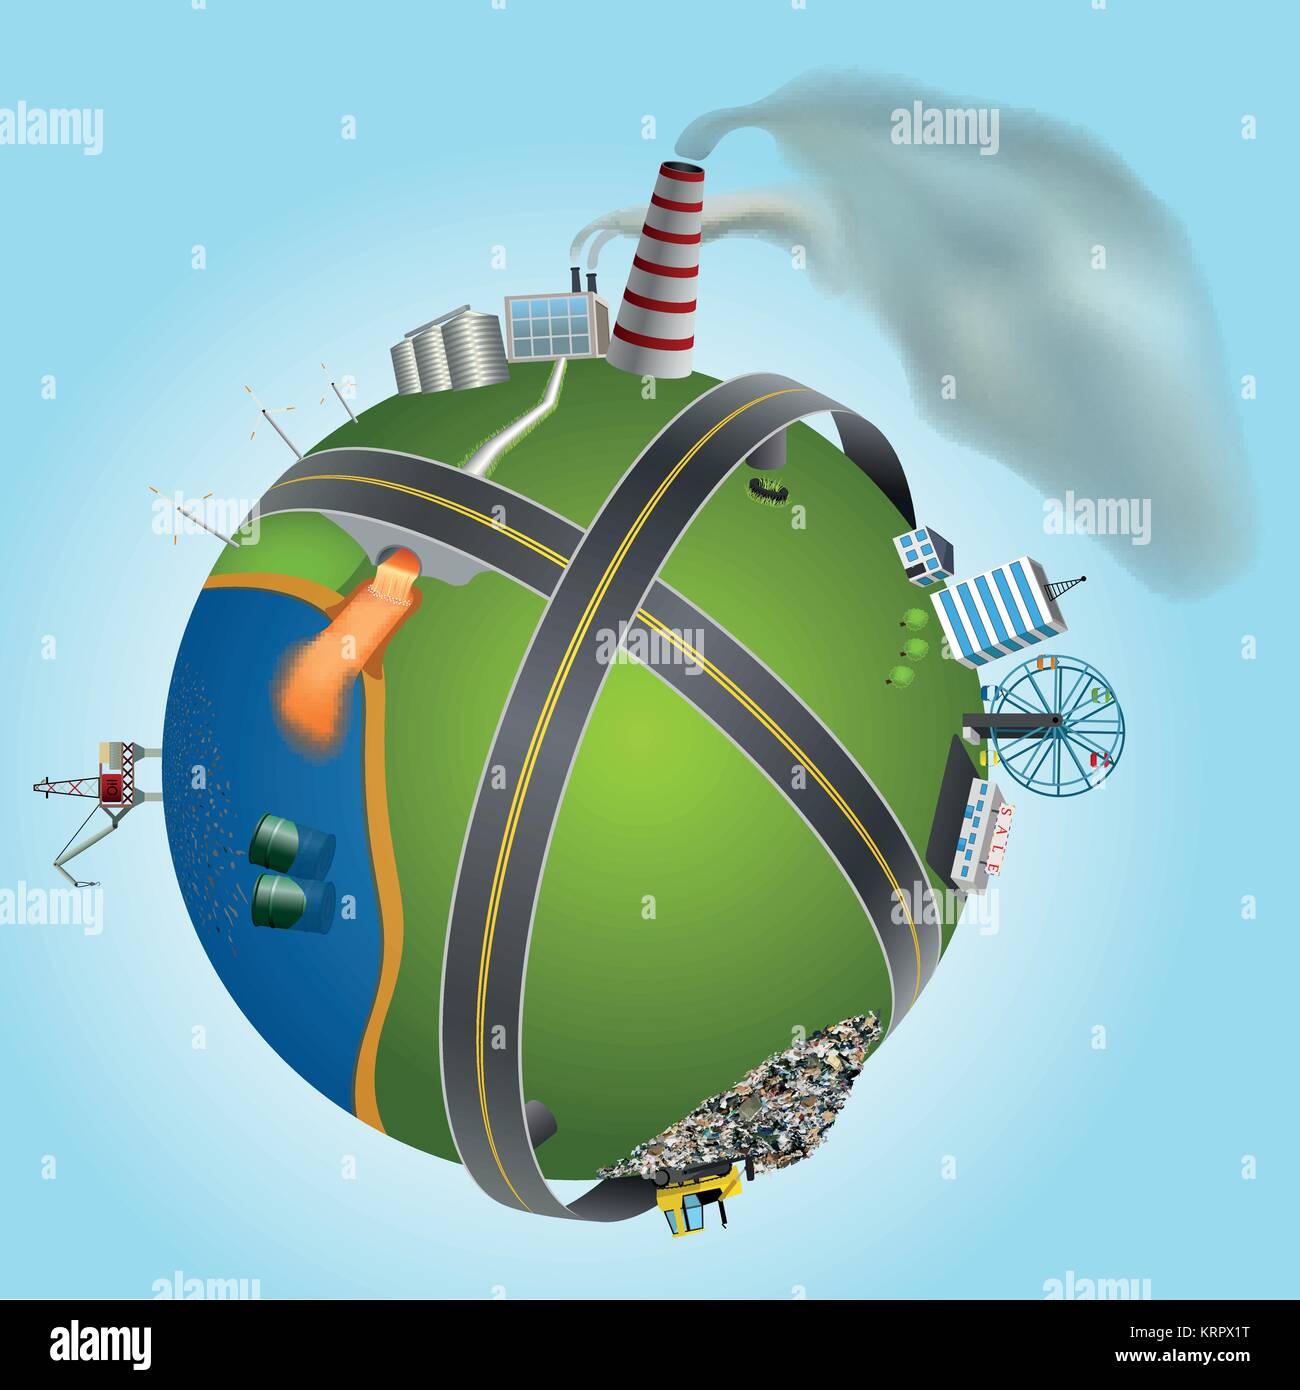 Illustration Of Global Environmental Problems Showing Types Of